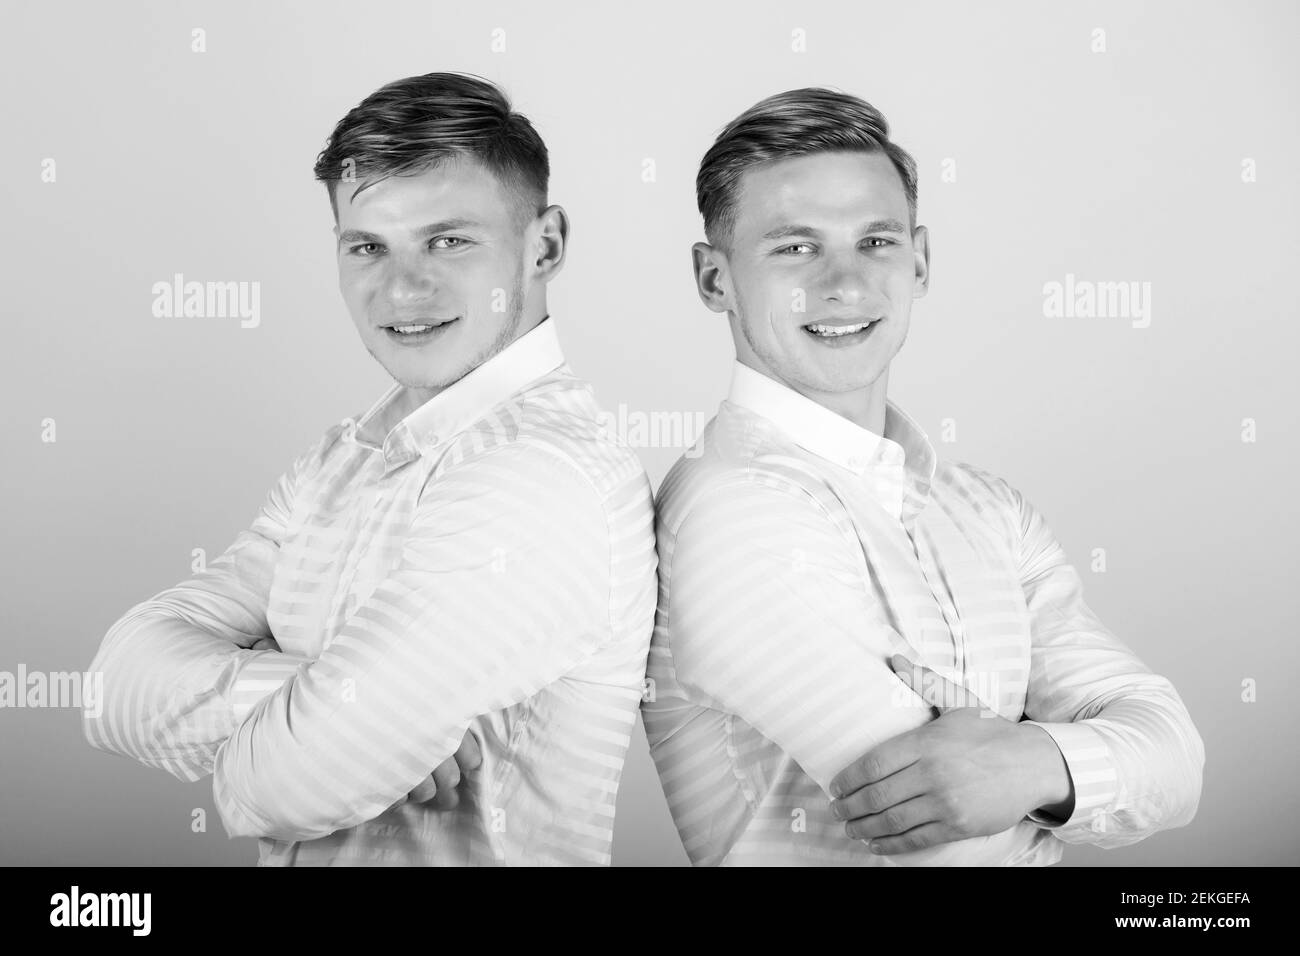 Two brothers smiling. Happy men with hands folded. Models gays standing together. Twins wearing shirts. Family, brotherhood and friendship concept. Stock Photo